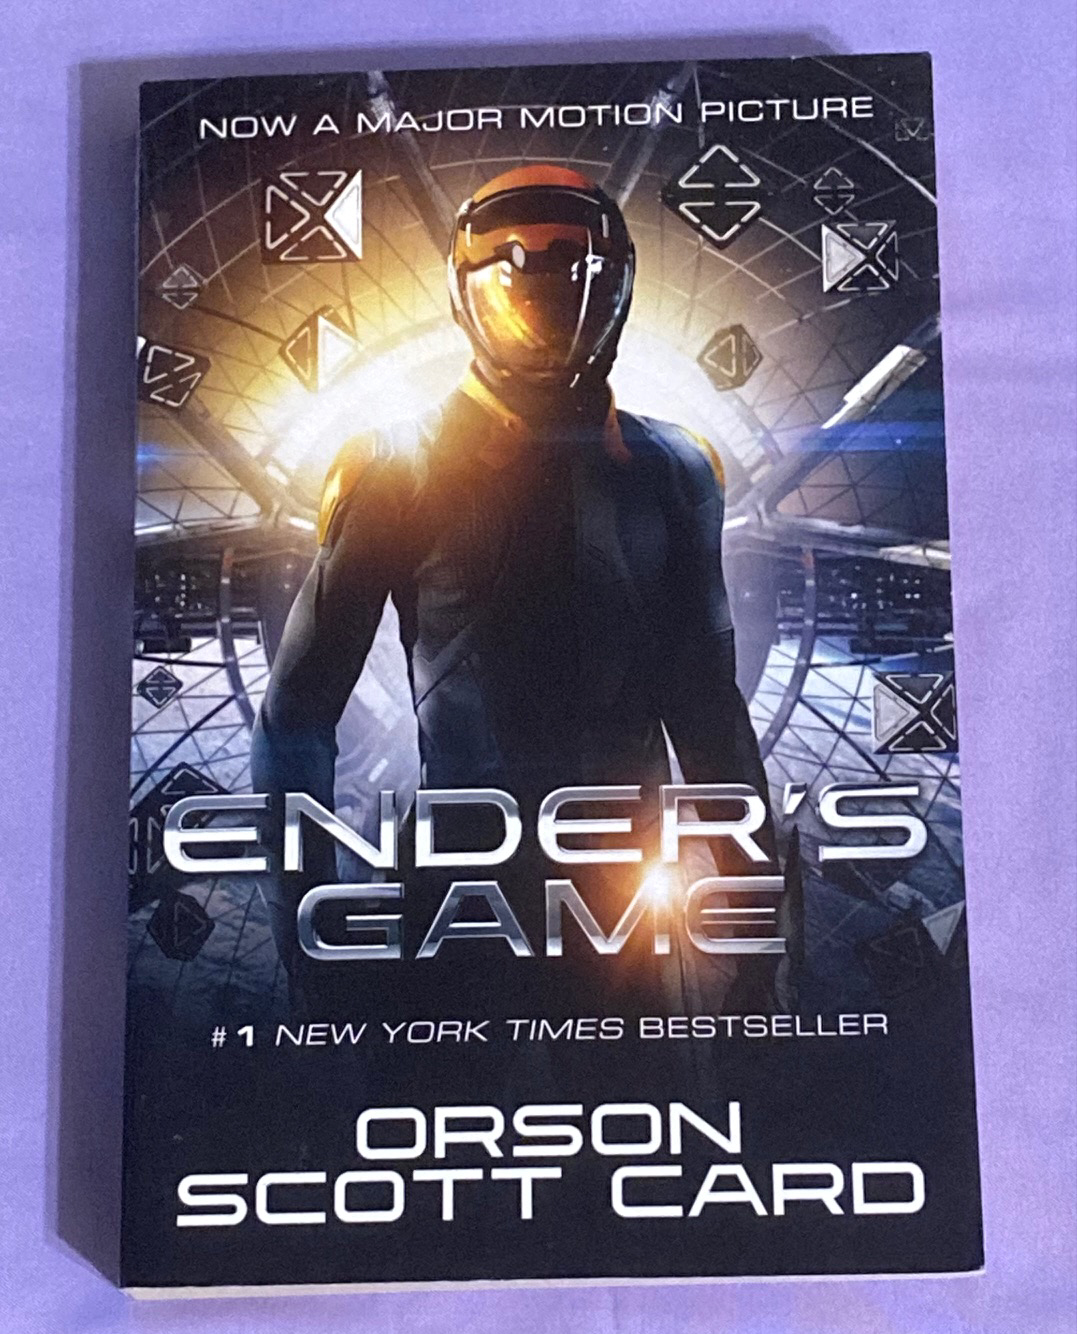 Primary image for SC book Ender's Game by Orson Scott Card 2013 Tor Teen Edition Sci Fi